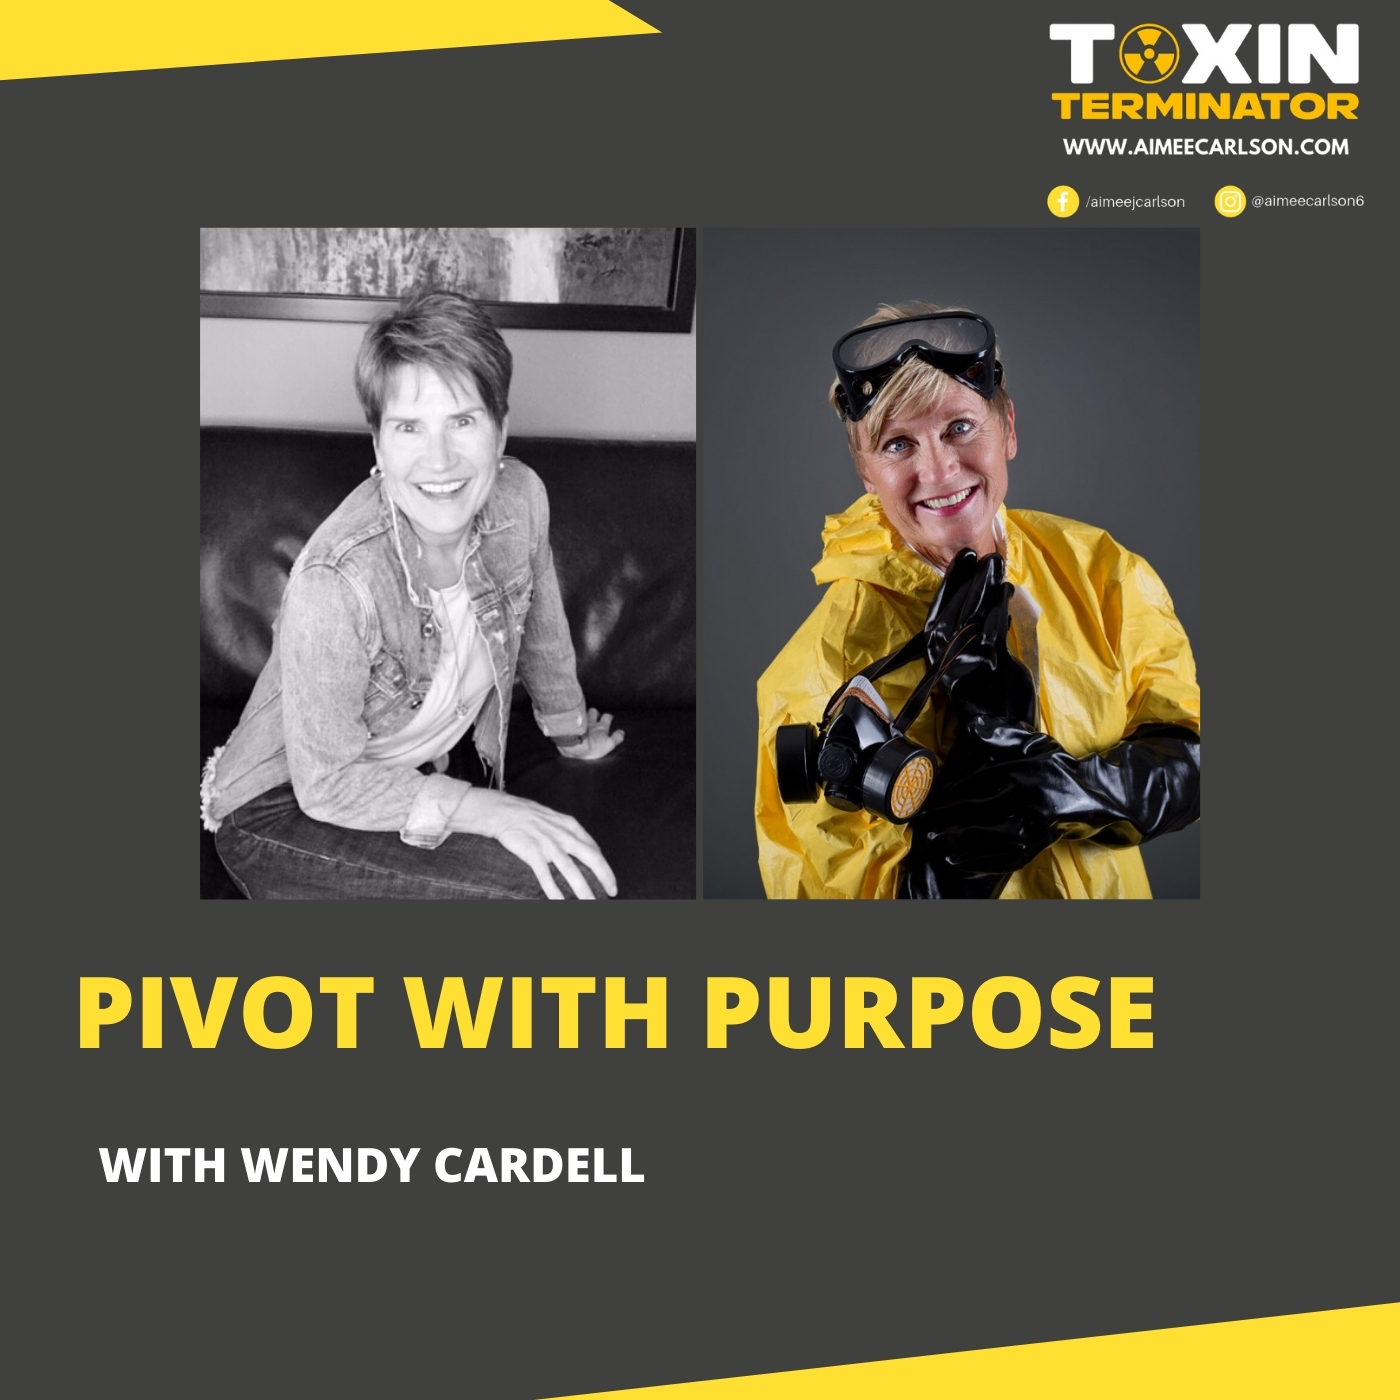 Pivot with Purpose with Wendy Cardell